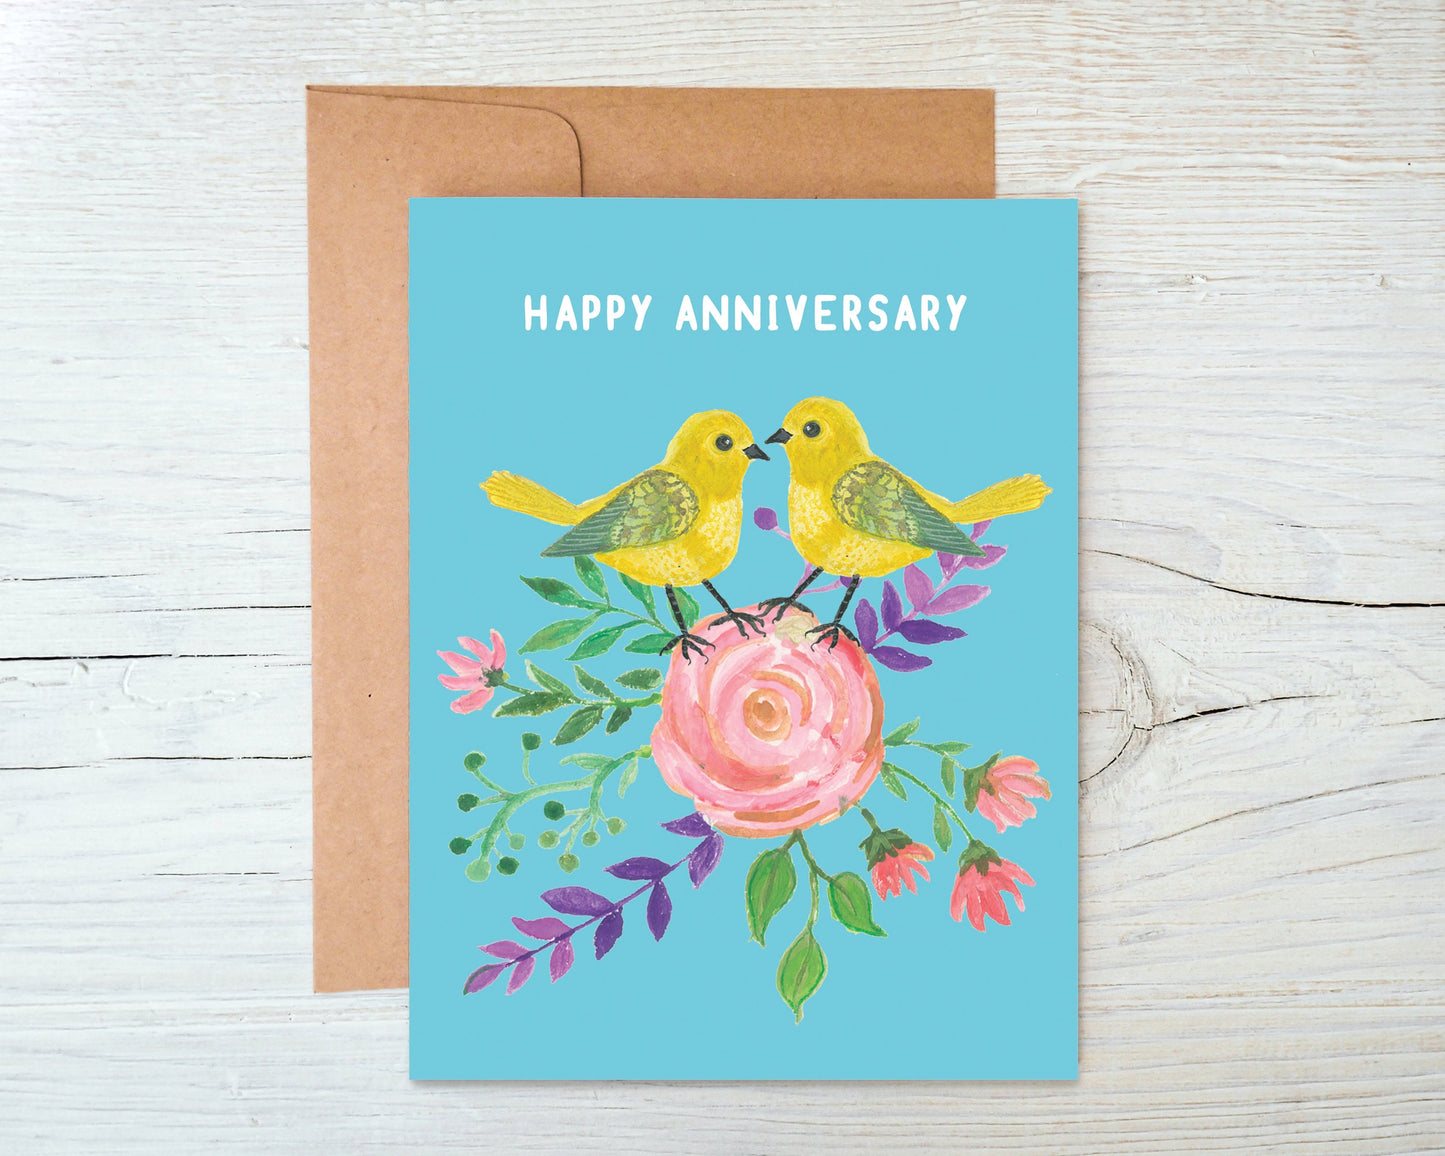 Anniversary Card, Card for Husband Wife Boyfriend, Happy Anniversary, Wedding Anniversary Card, Floral Card, Love Birds Item Code - COTC L21